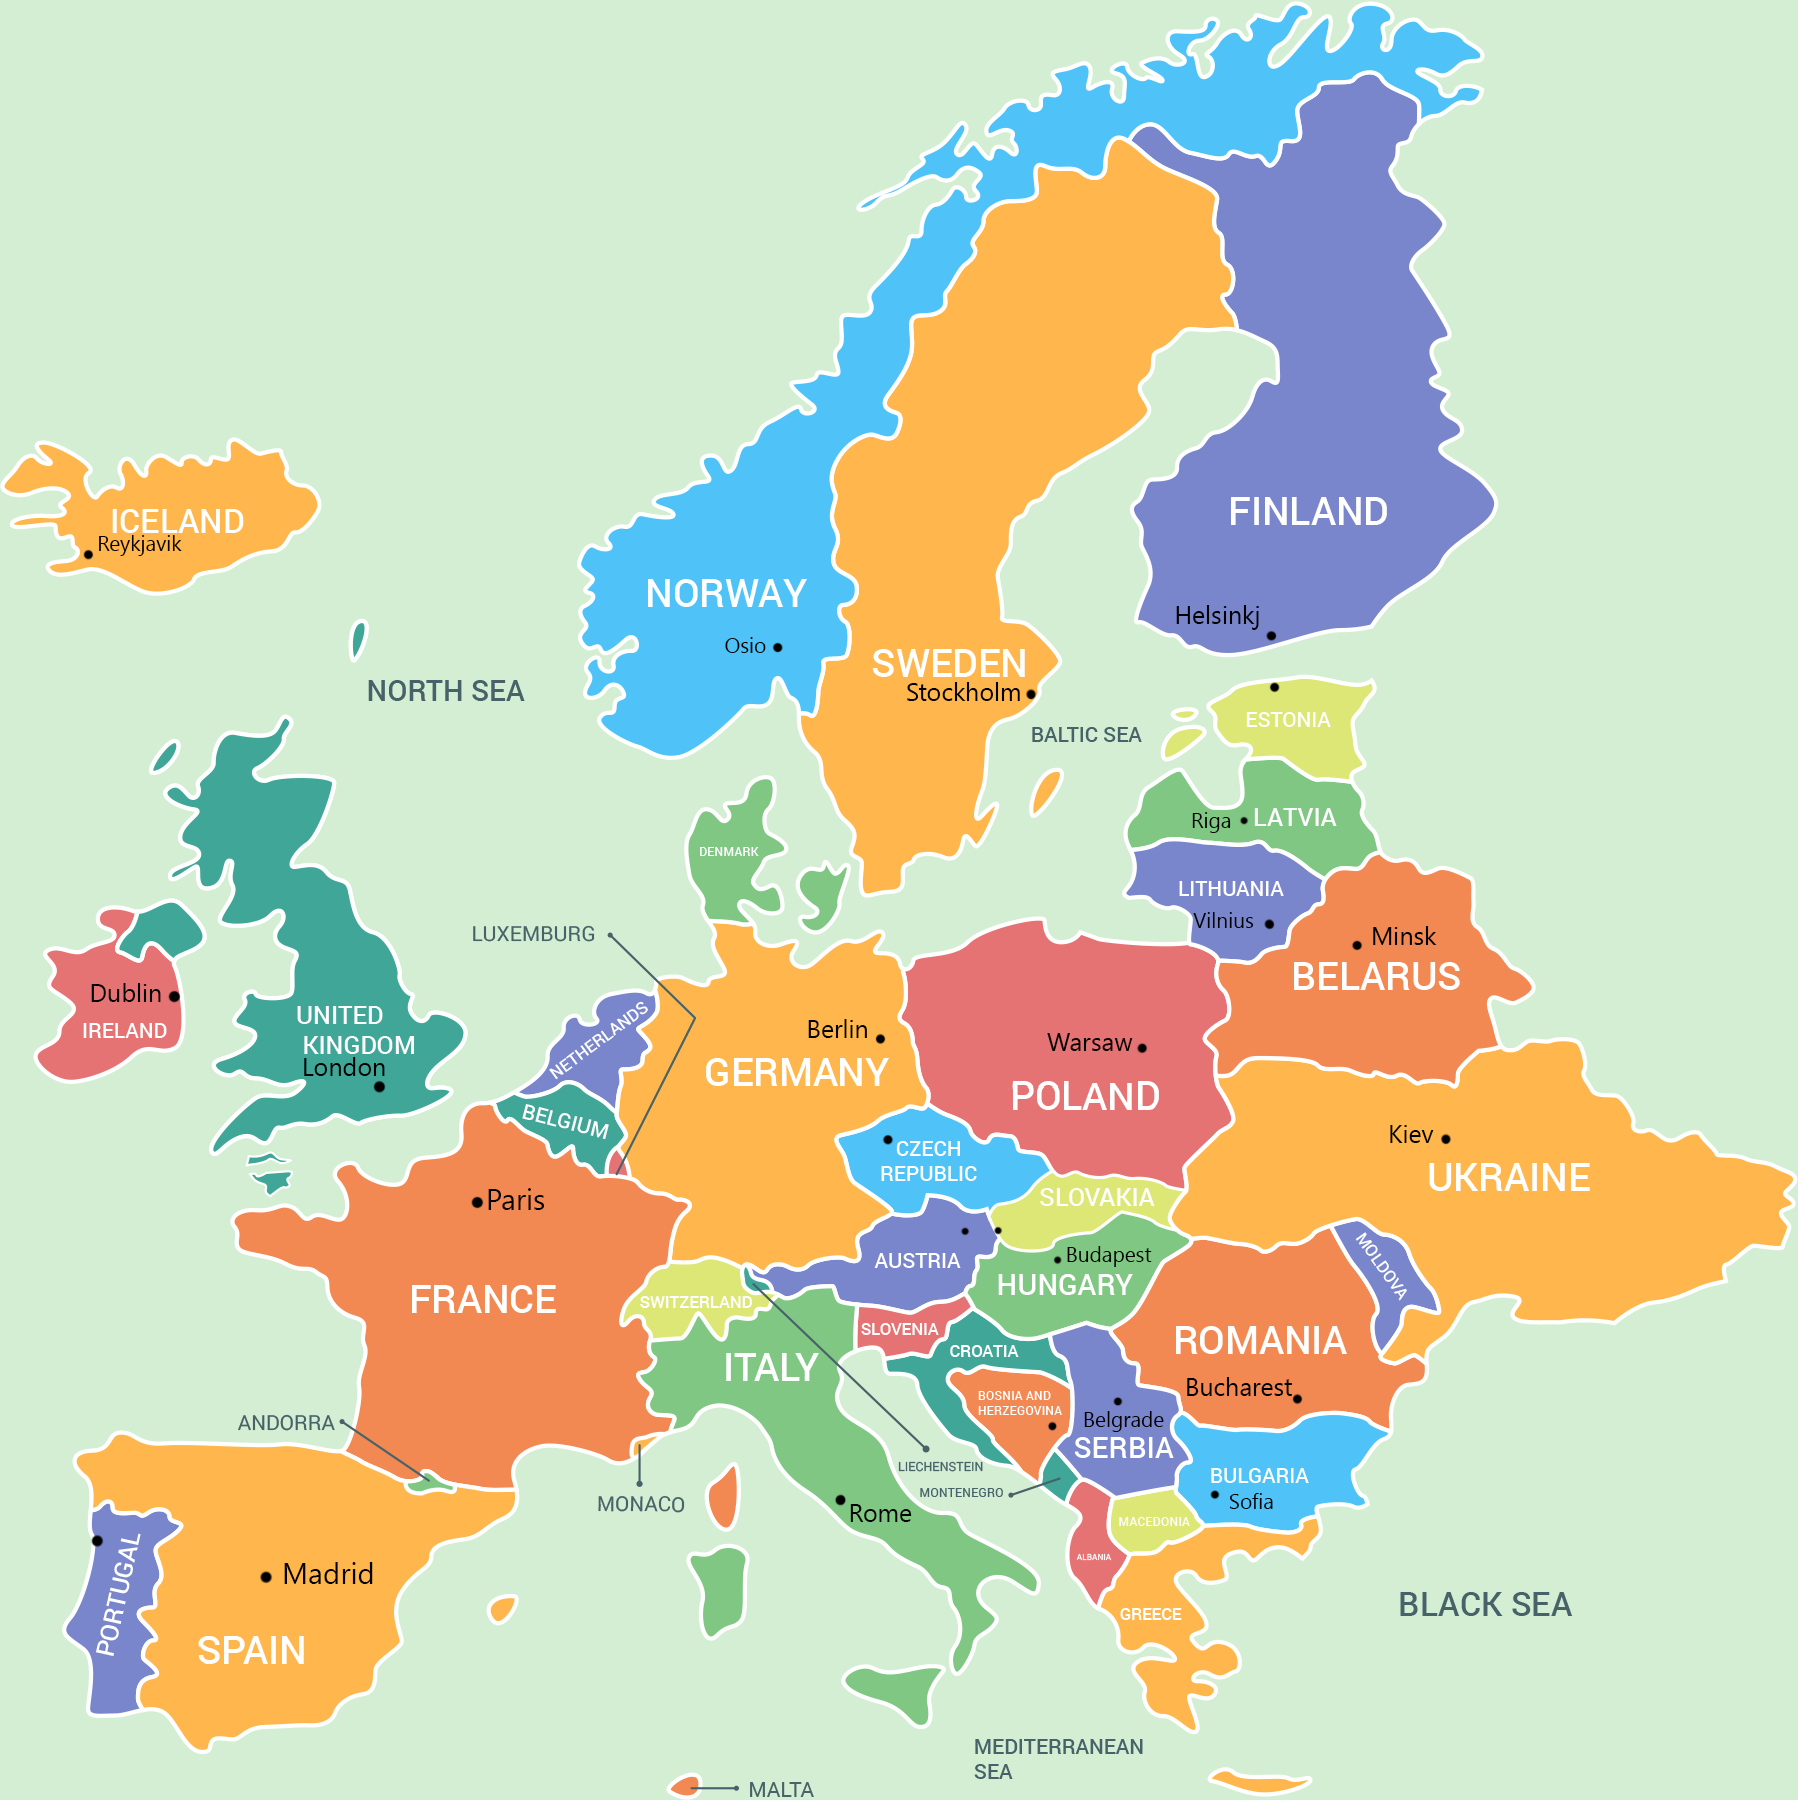 map-of-europe-with-countries-labeled